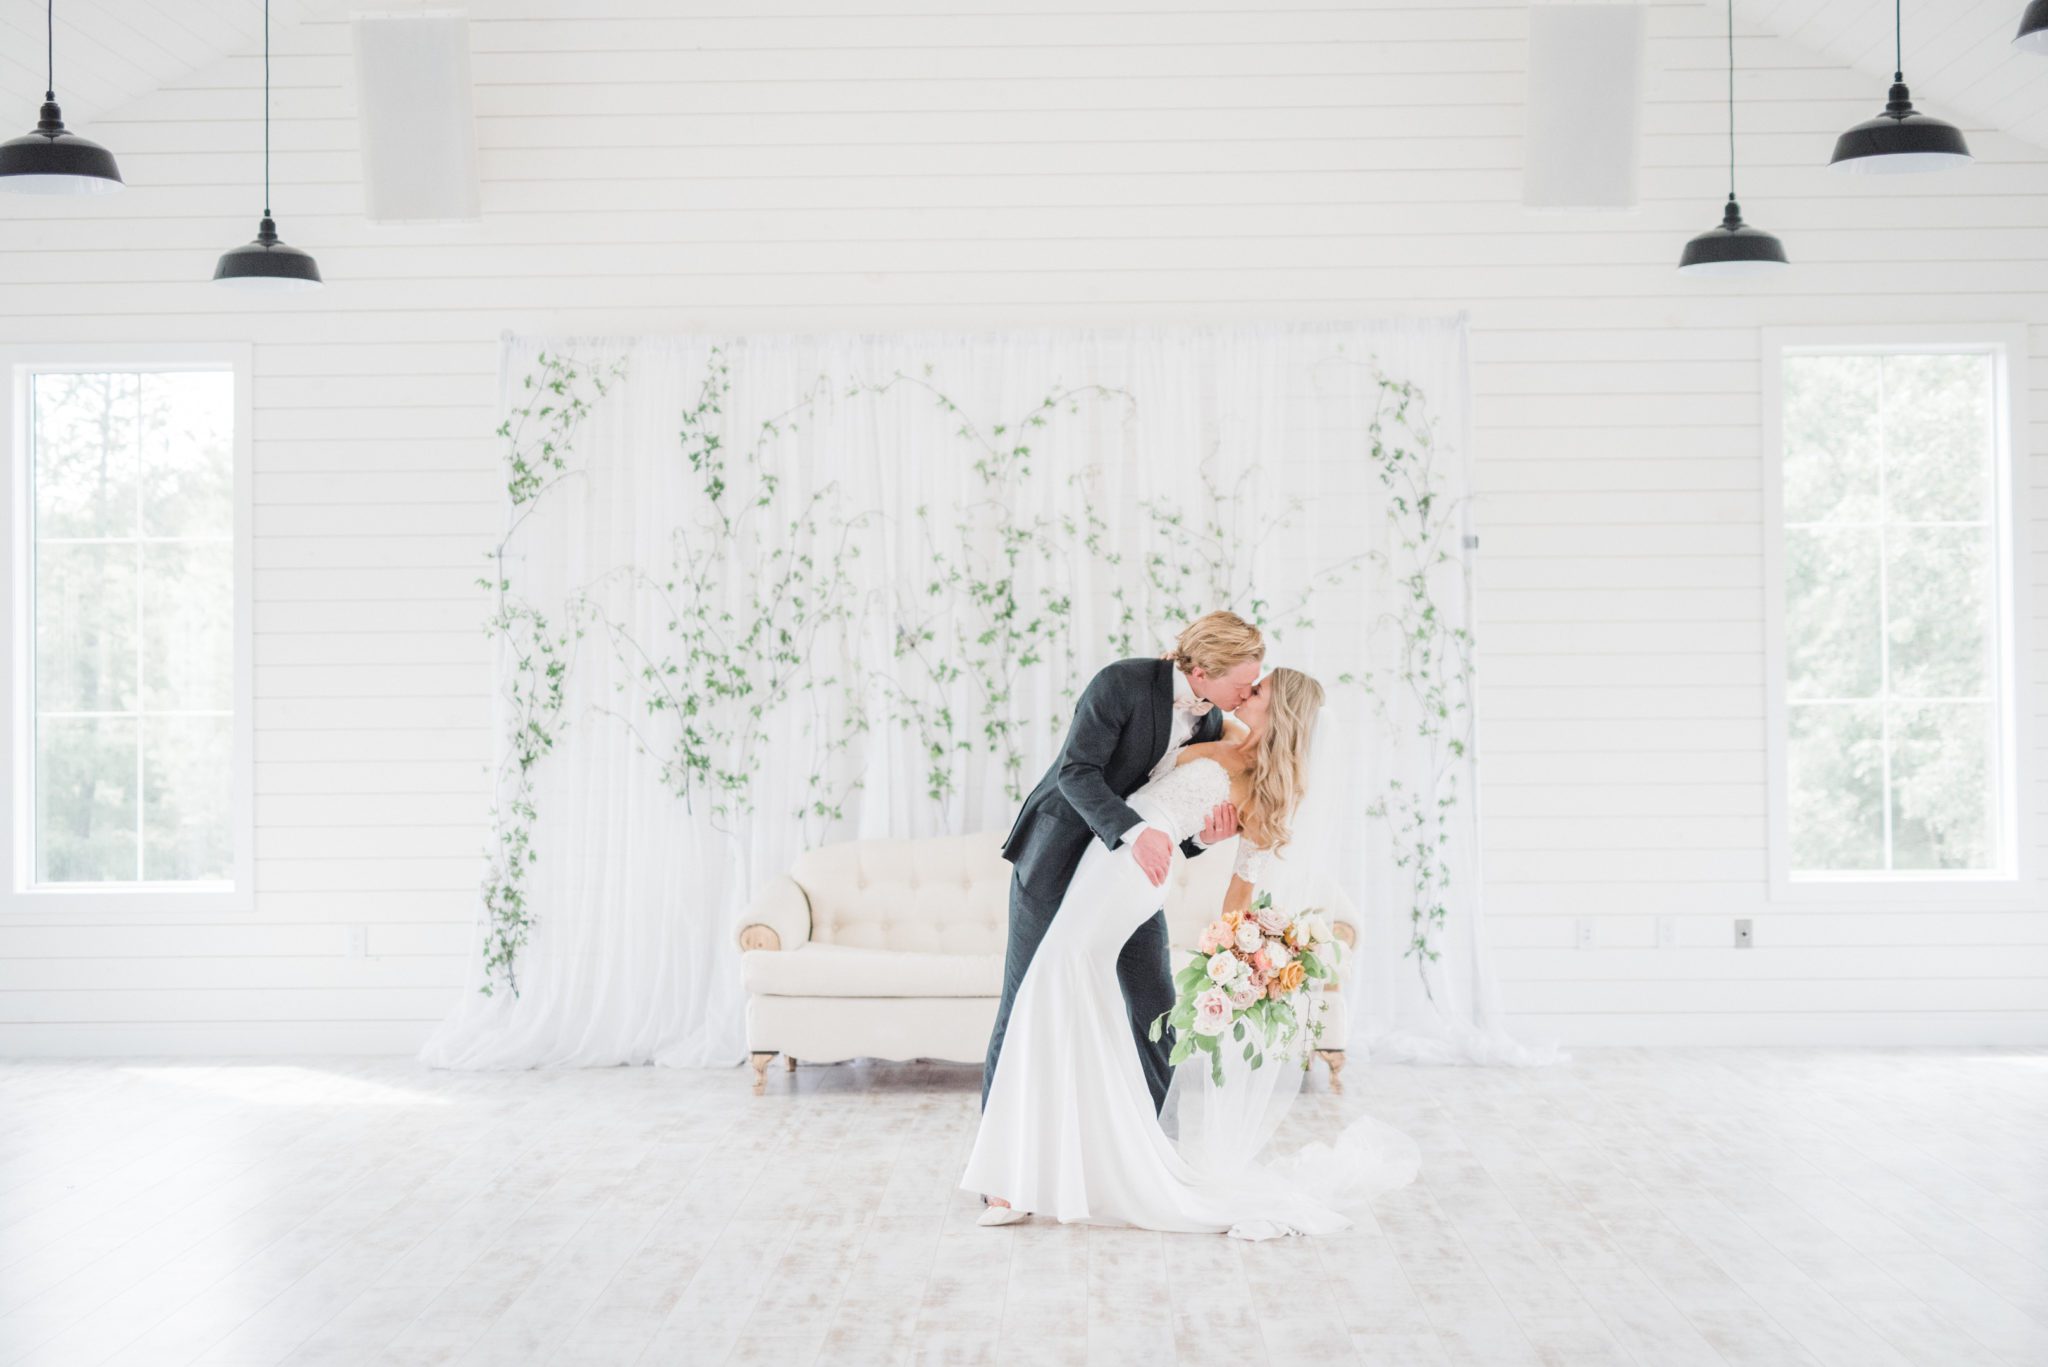 Romantic and minimalist wedding day portraits at The Barn at Wind's Edge